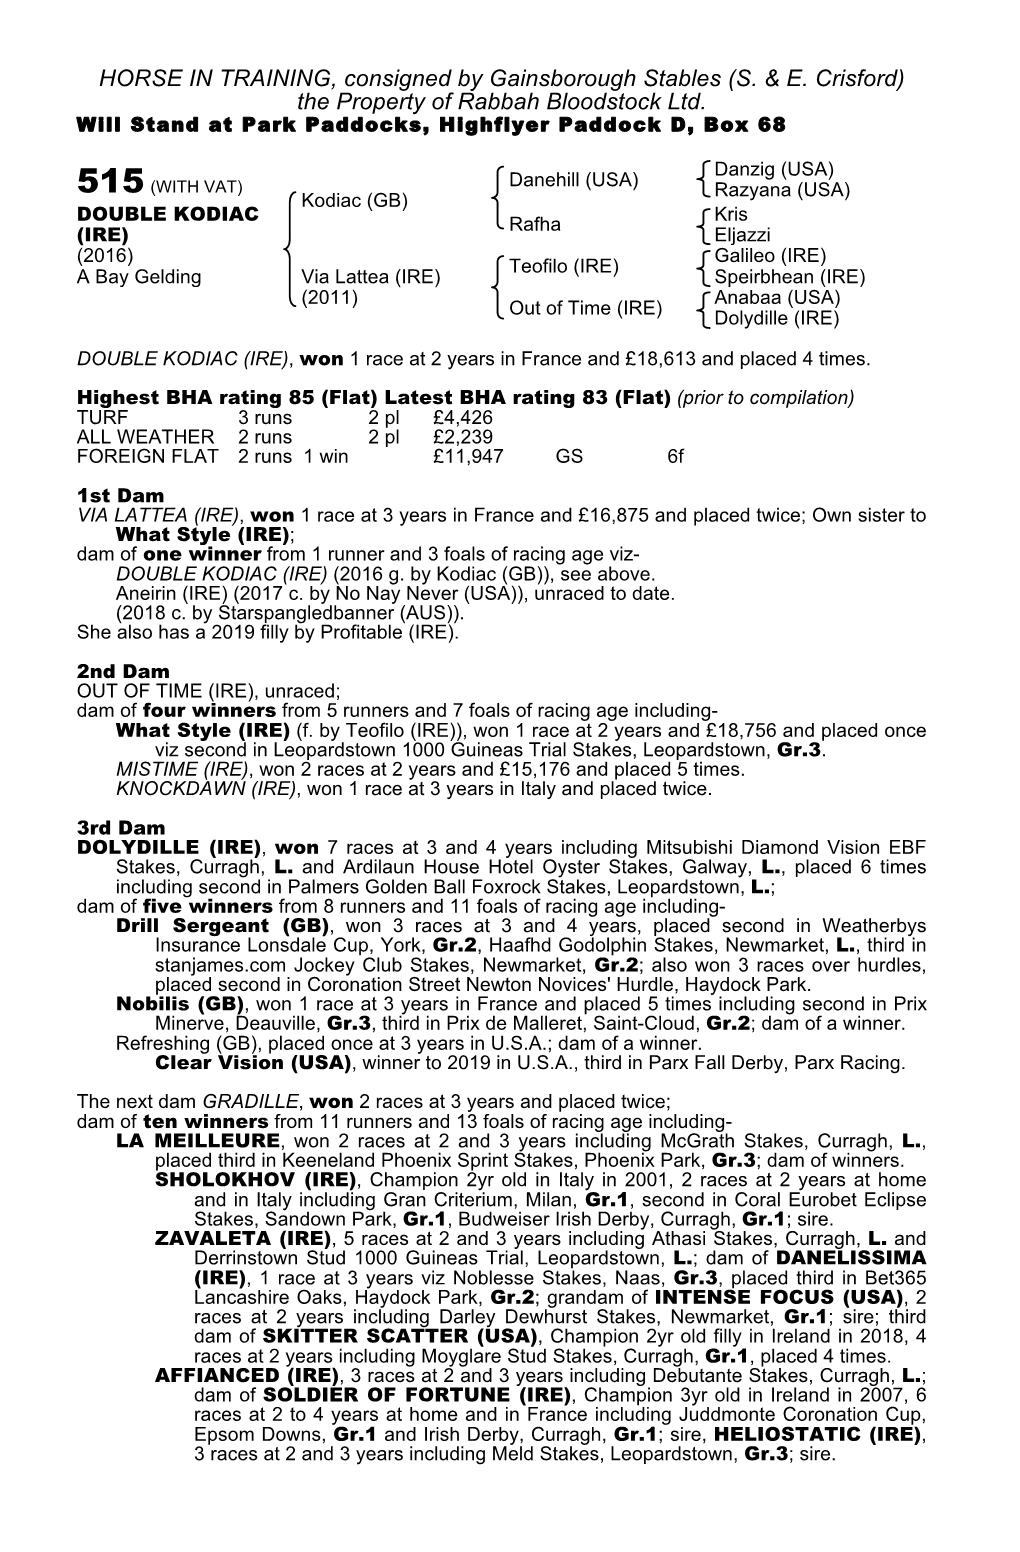 HORSE in TRAINING, Consigned by Gainsborough Stables (S. & E